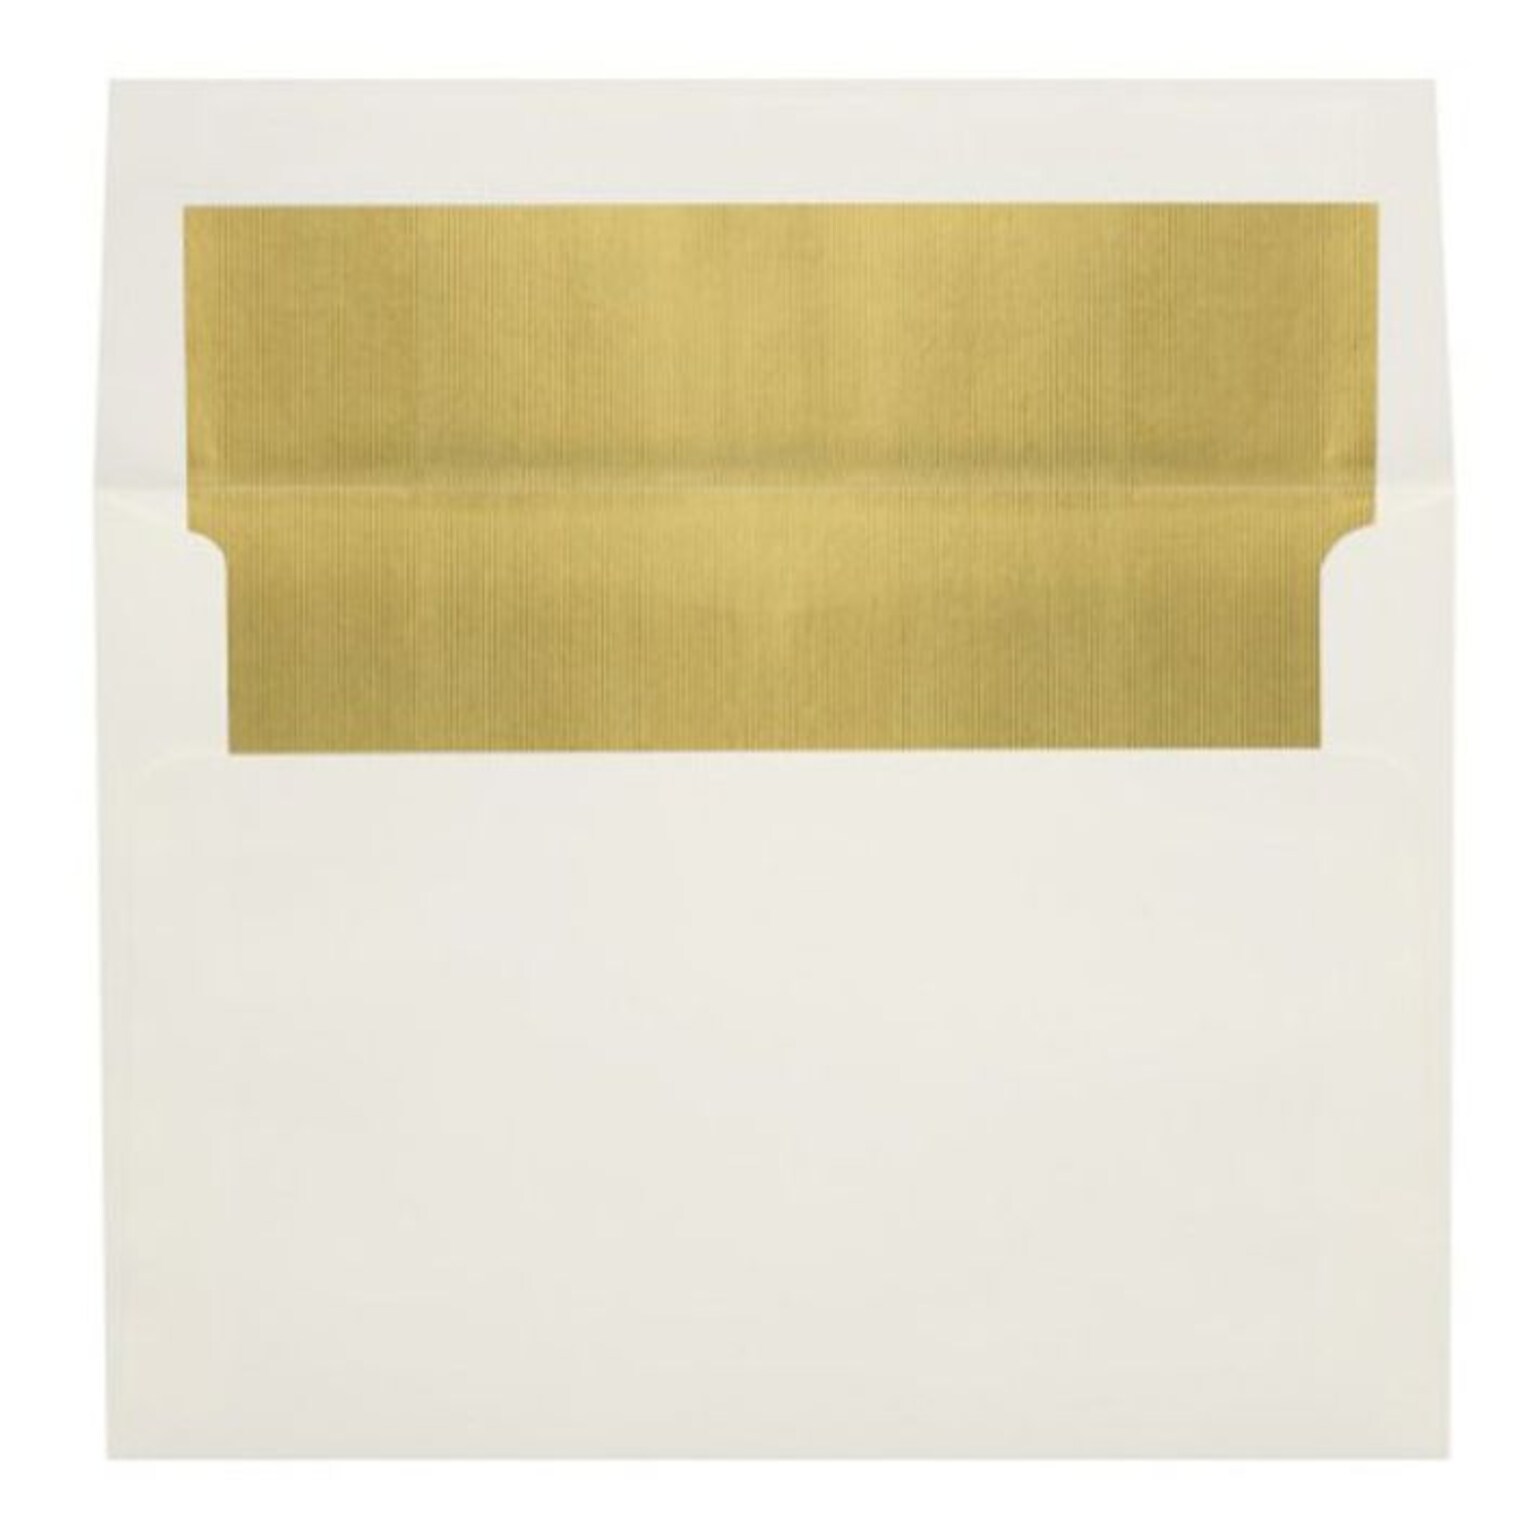 LUX A8 Foil Lined Invitation Envelopes (5 1/2 x 8 1/8) 250/Box, Natural w/Gold LUX Lining (FLNT4885-04-250)